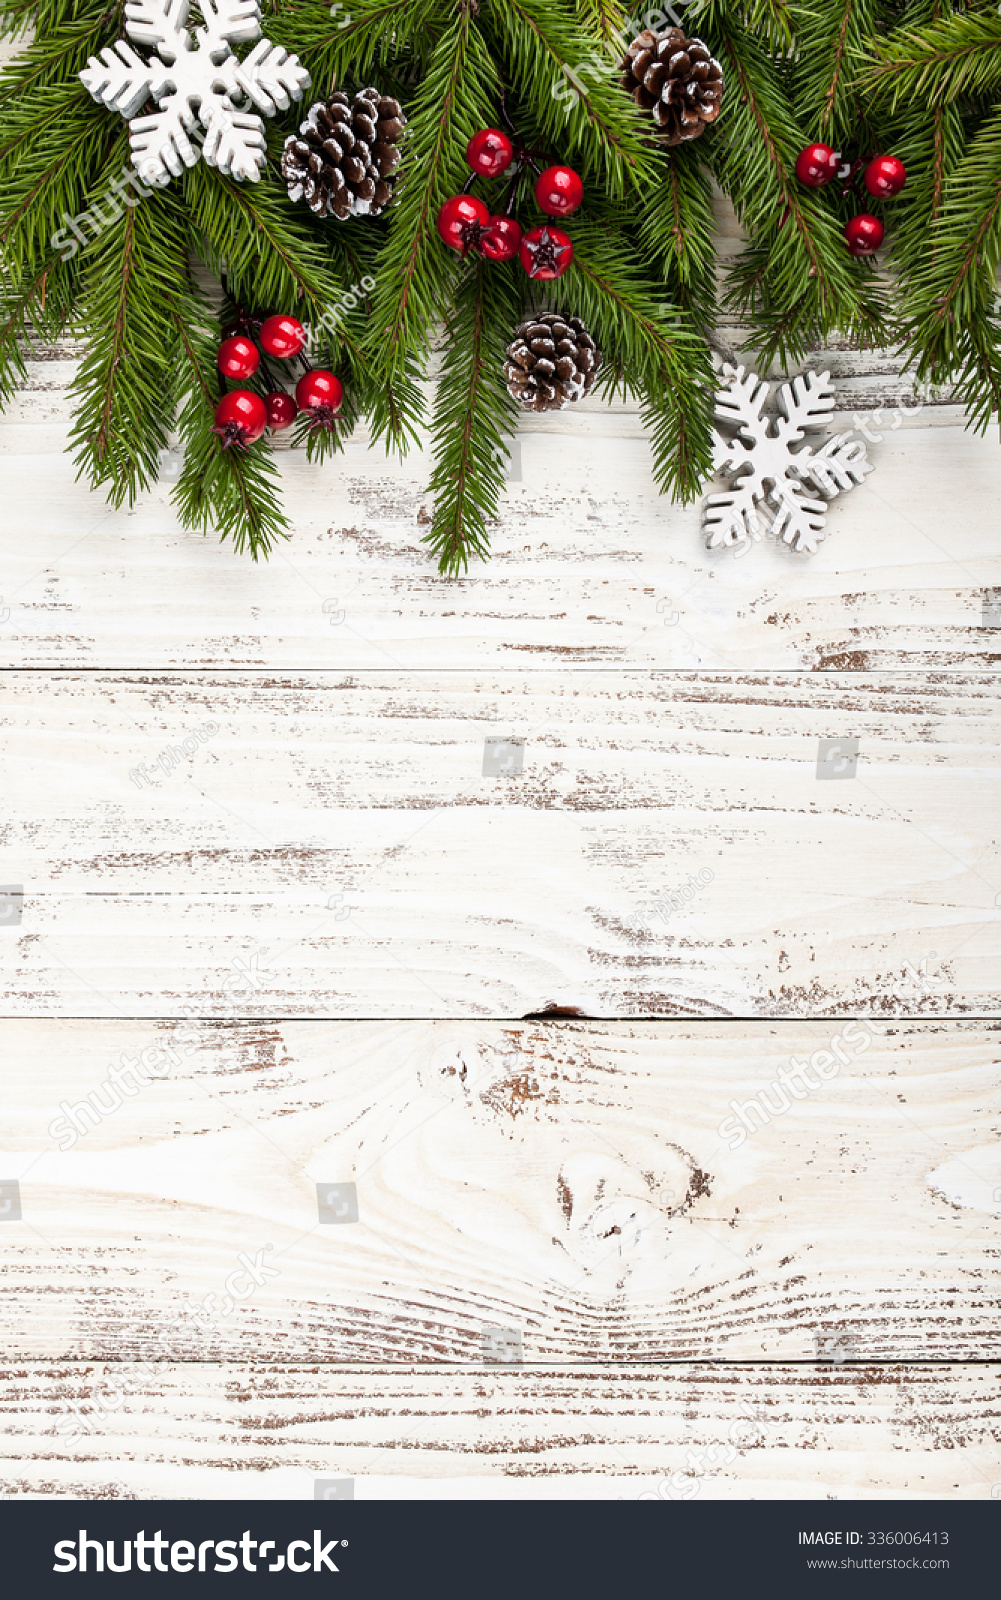 Fir Tree With Christmas Decorations On The Rustic Wooden Background ...